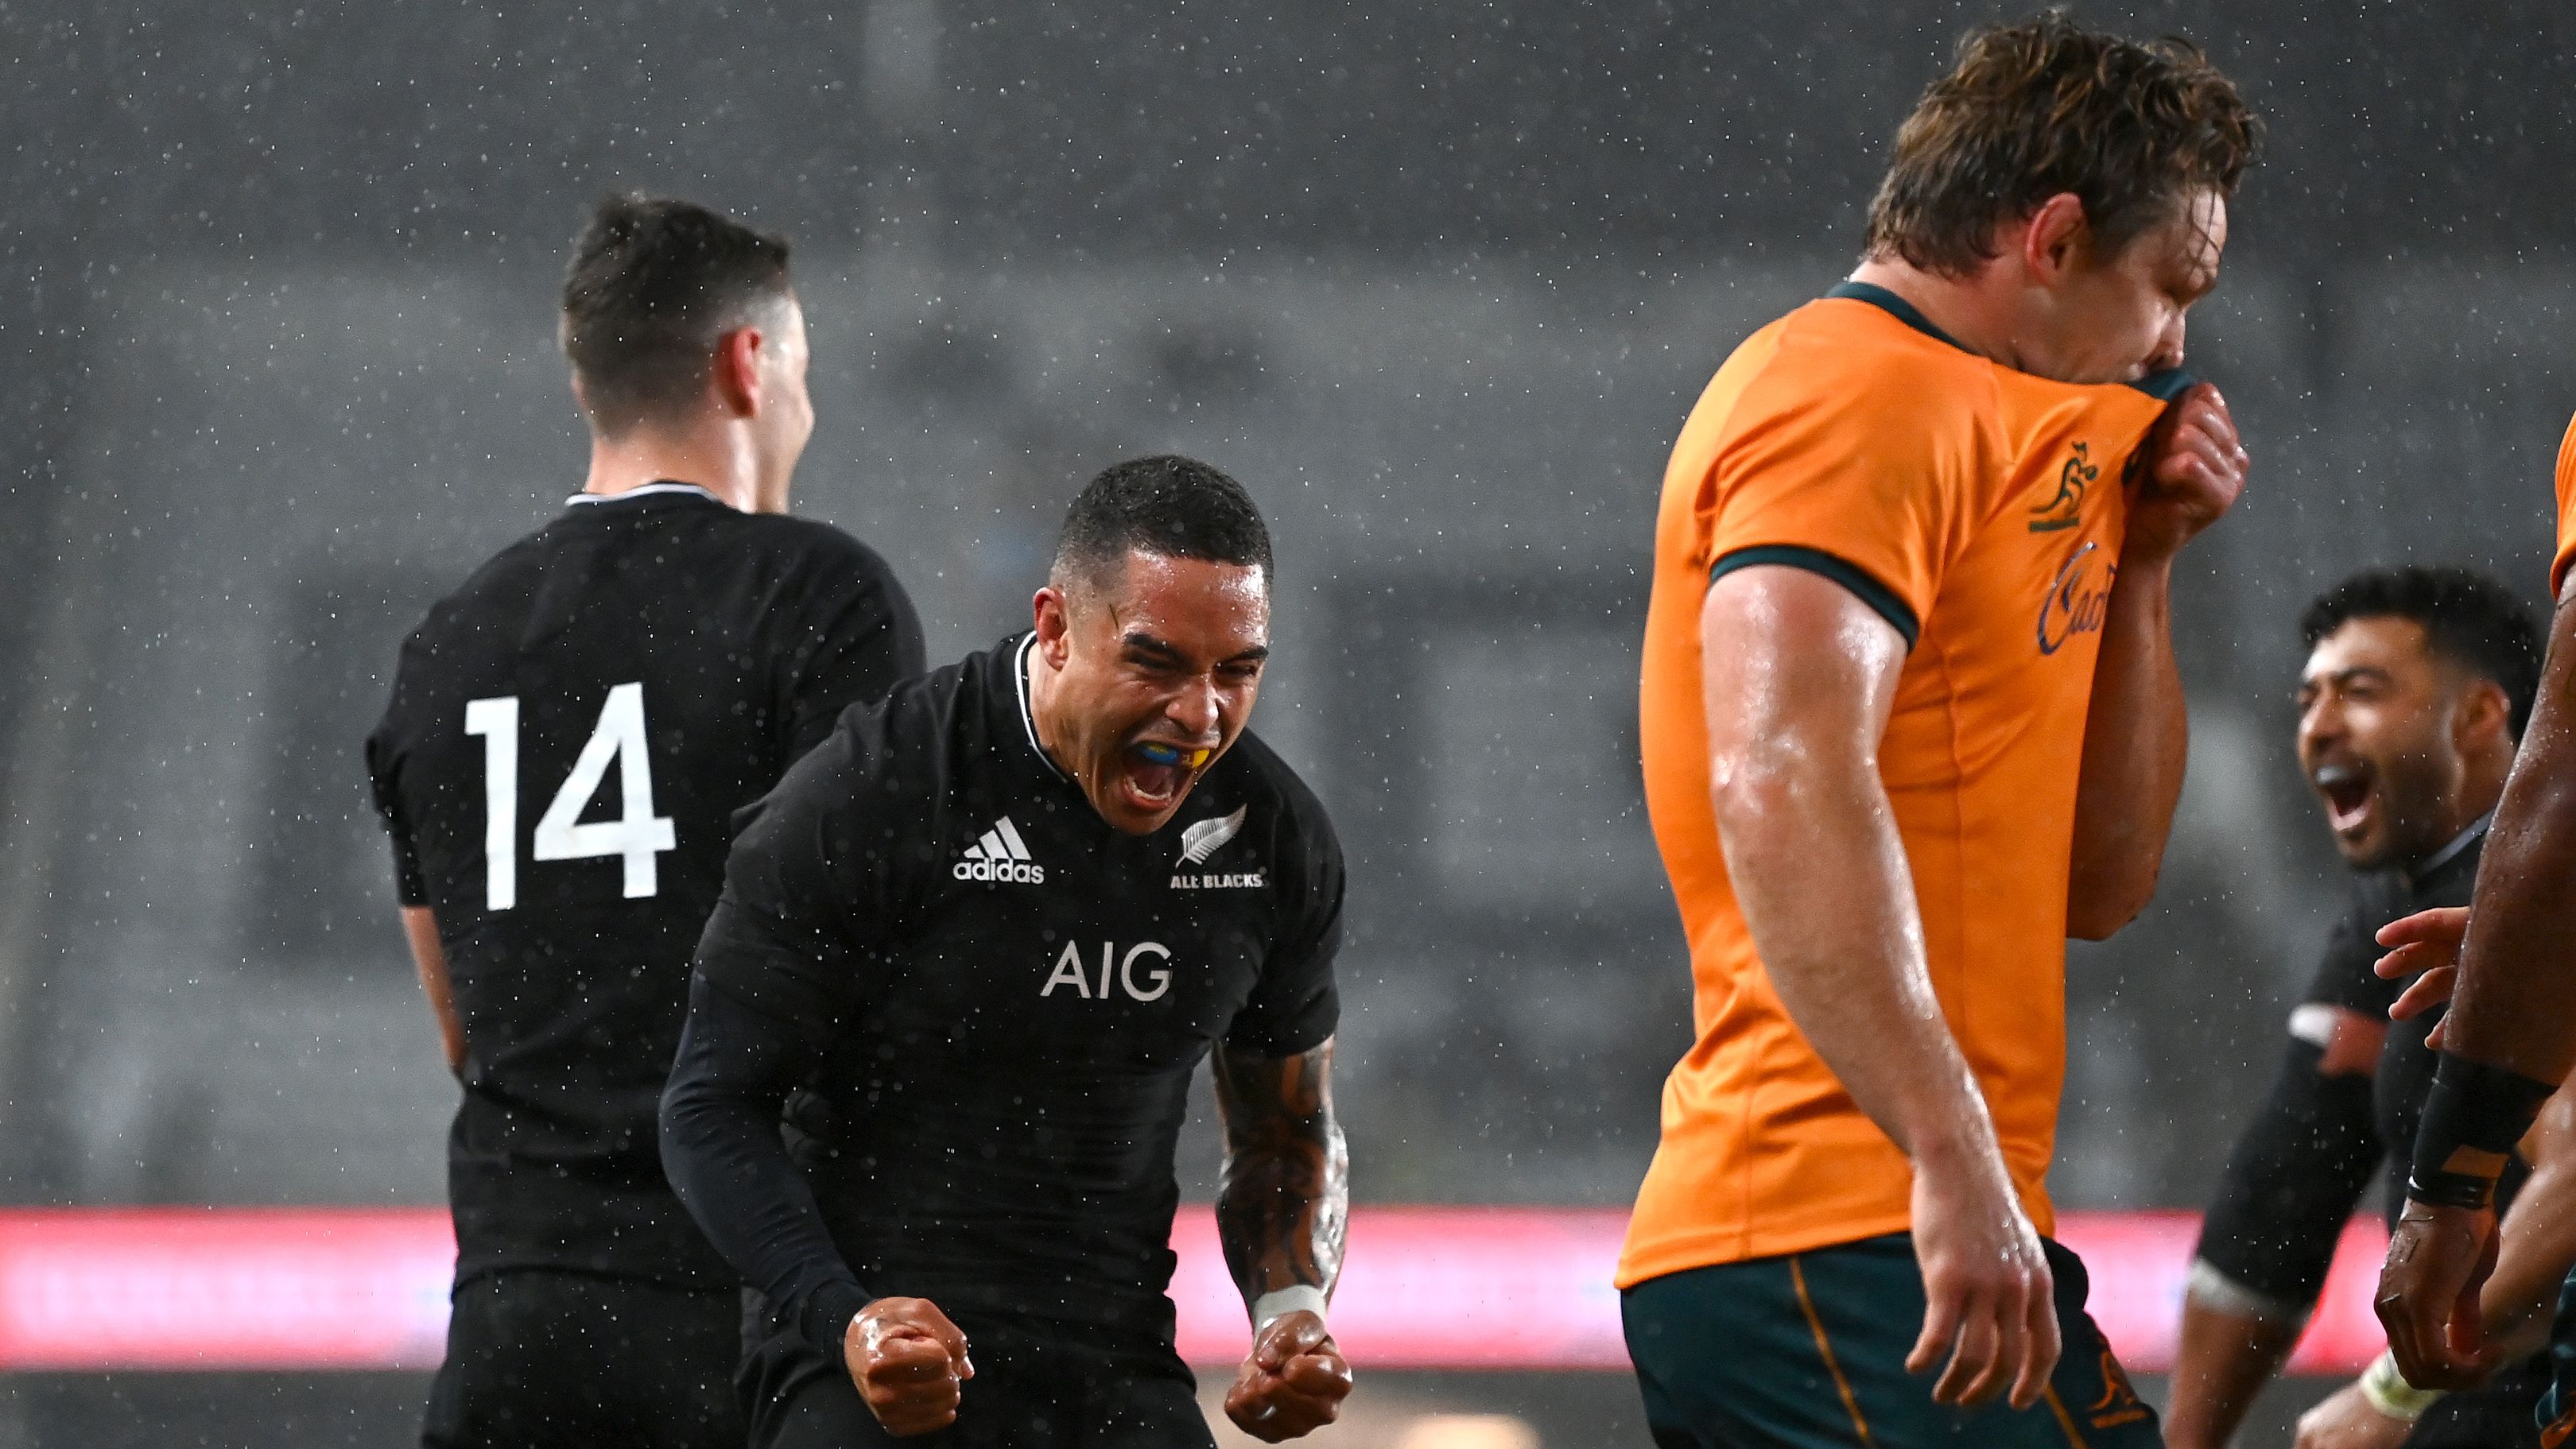 Rennie takes another shot at All Blacks